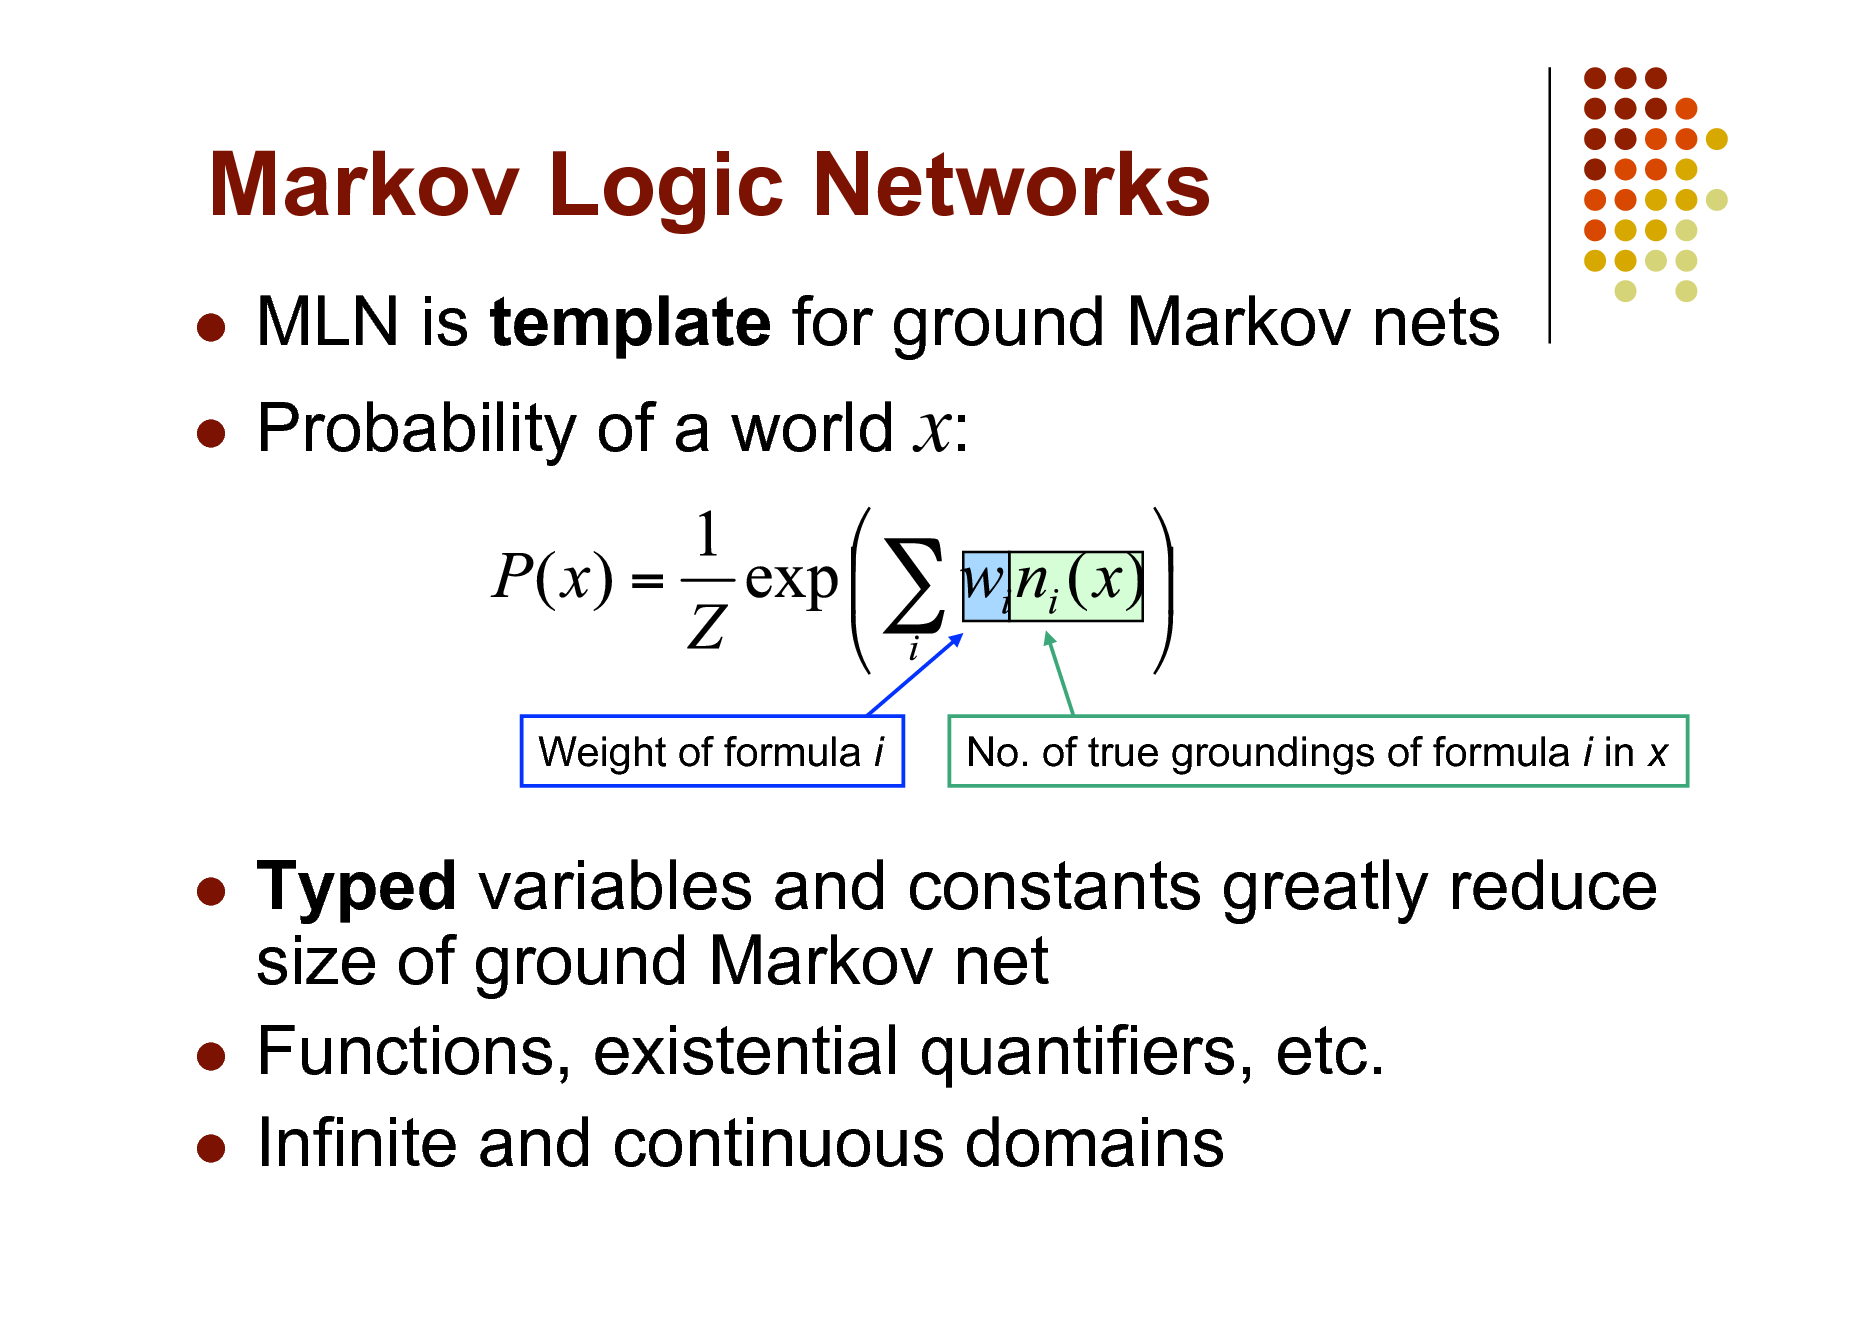 Slide: Markov Logic Networks
 

MLN is template for ground Markov nets Probability of a world x:

Weight of formula i

No. of true groundings of formula i in x

Typed variables and constants greatly reduce size of ground Markov net  Functions, existential quantifiers, etc.  Infinite and continuous domains


